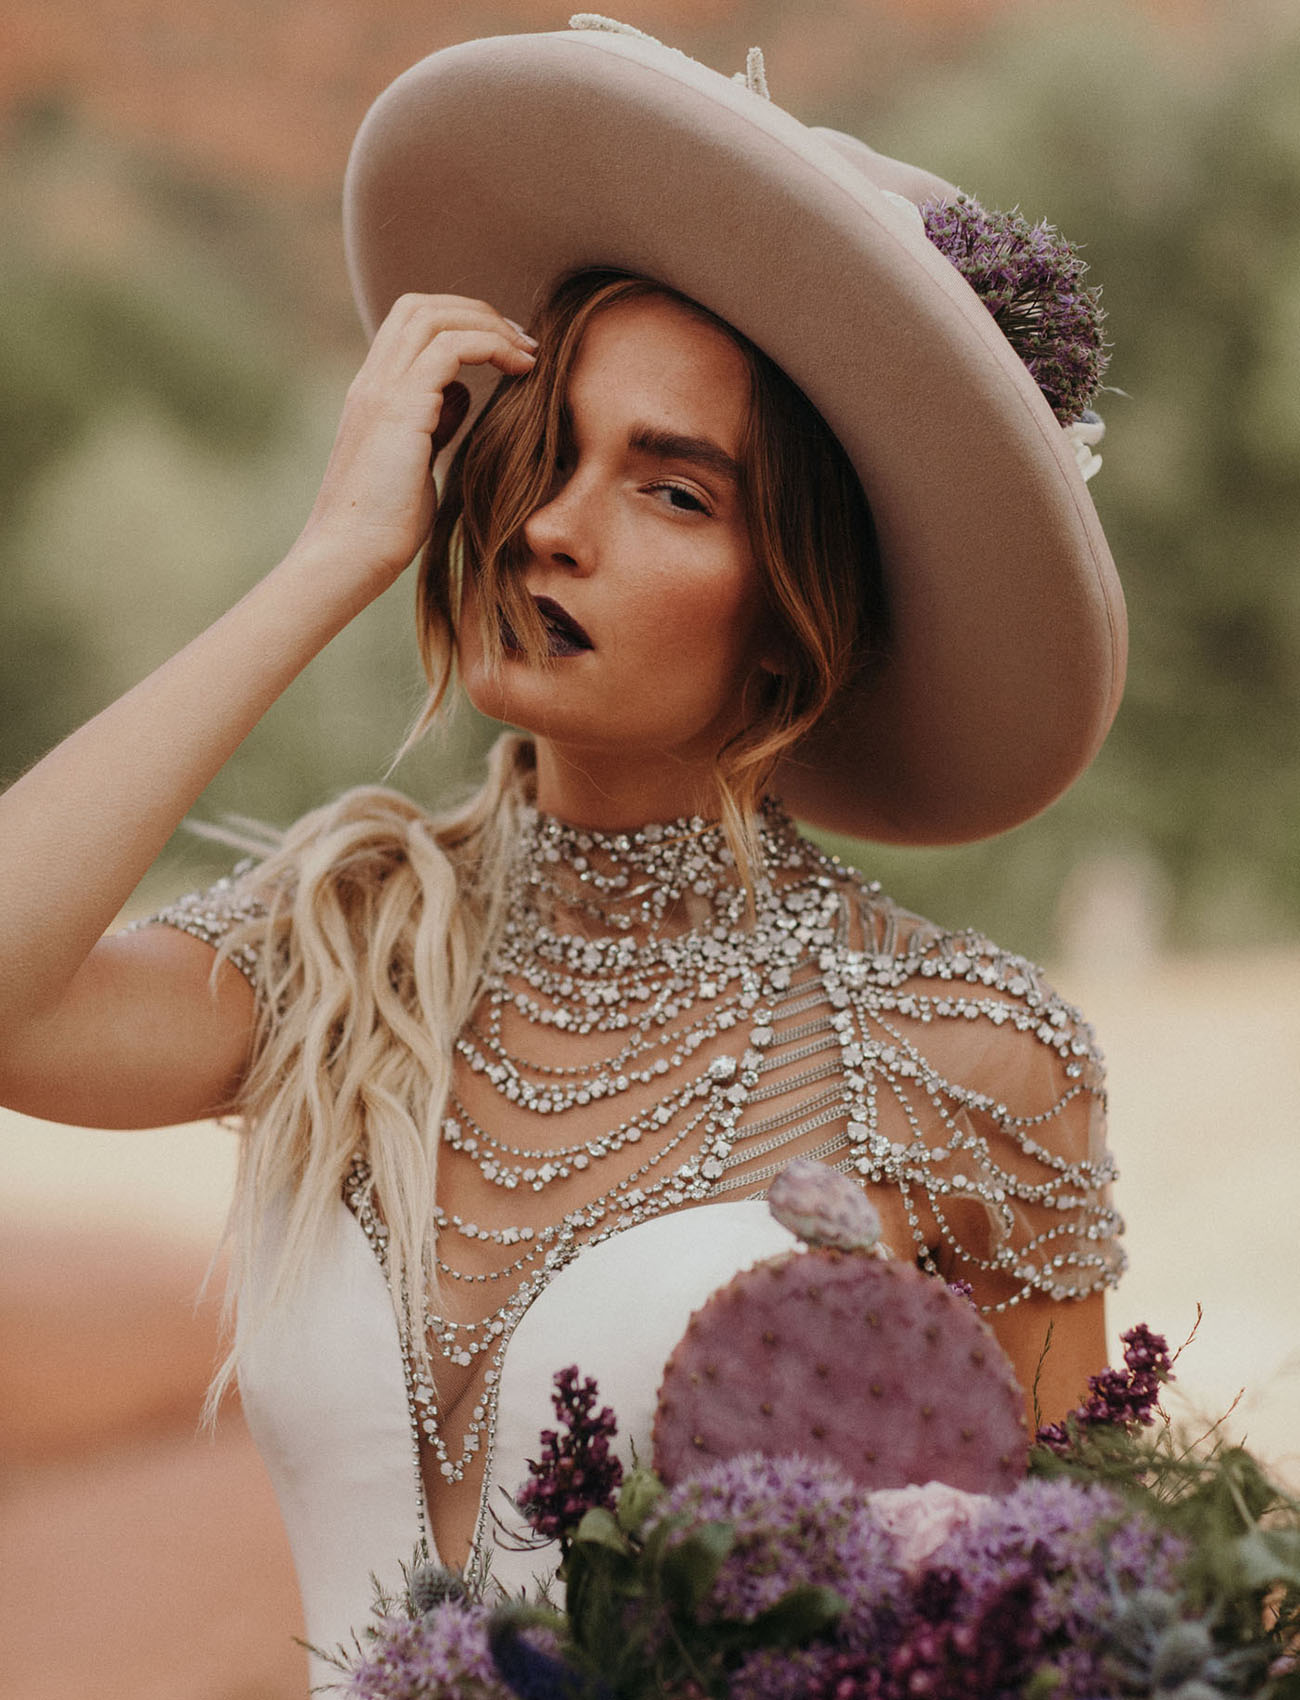 Bridal Trend with Hats